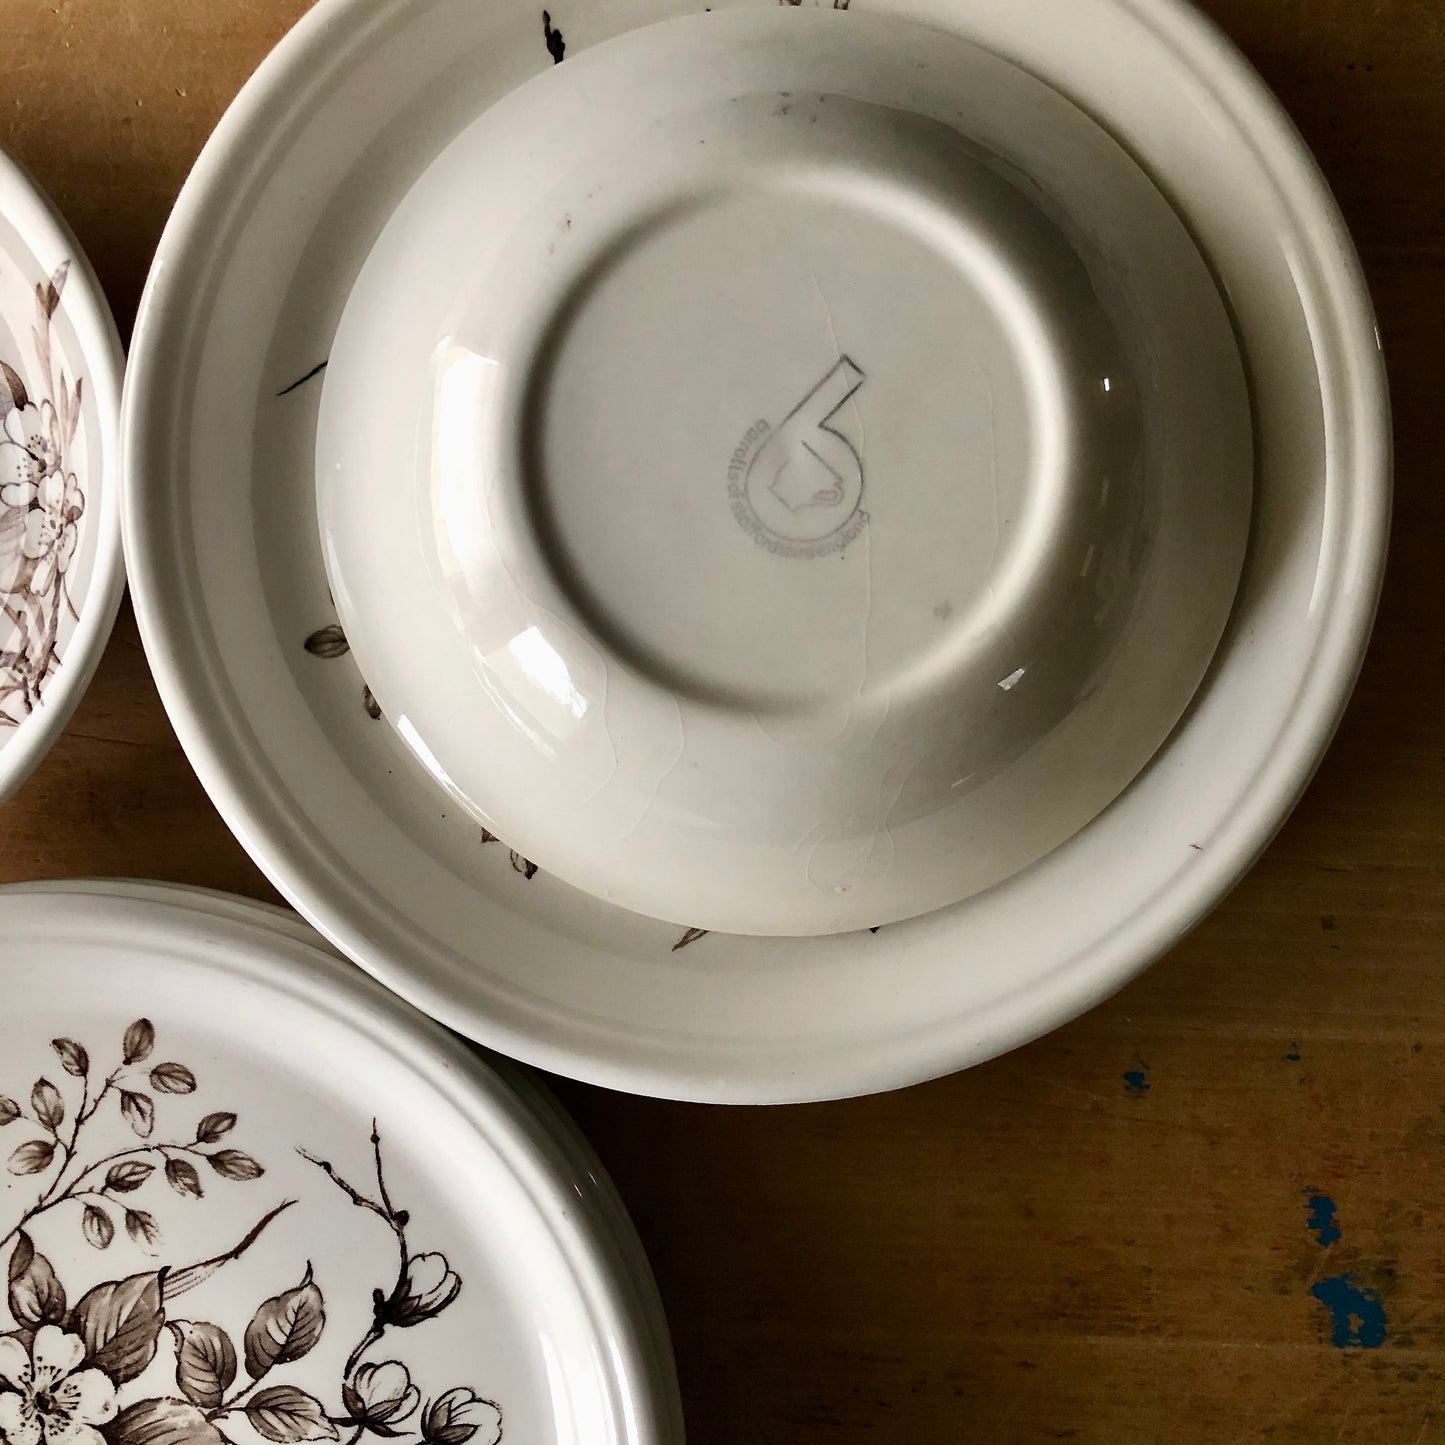 Vintage Brown and White English Floral Dishes (c.1960s)